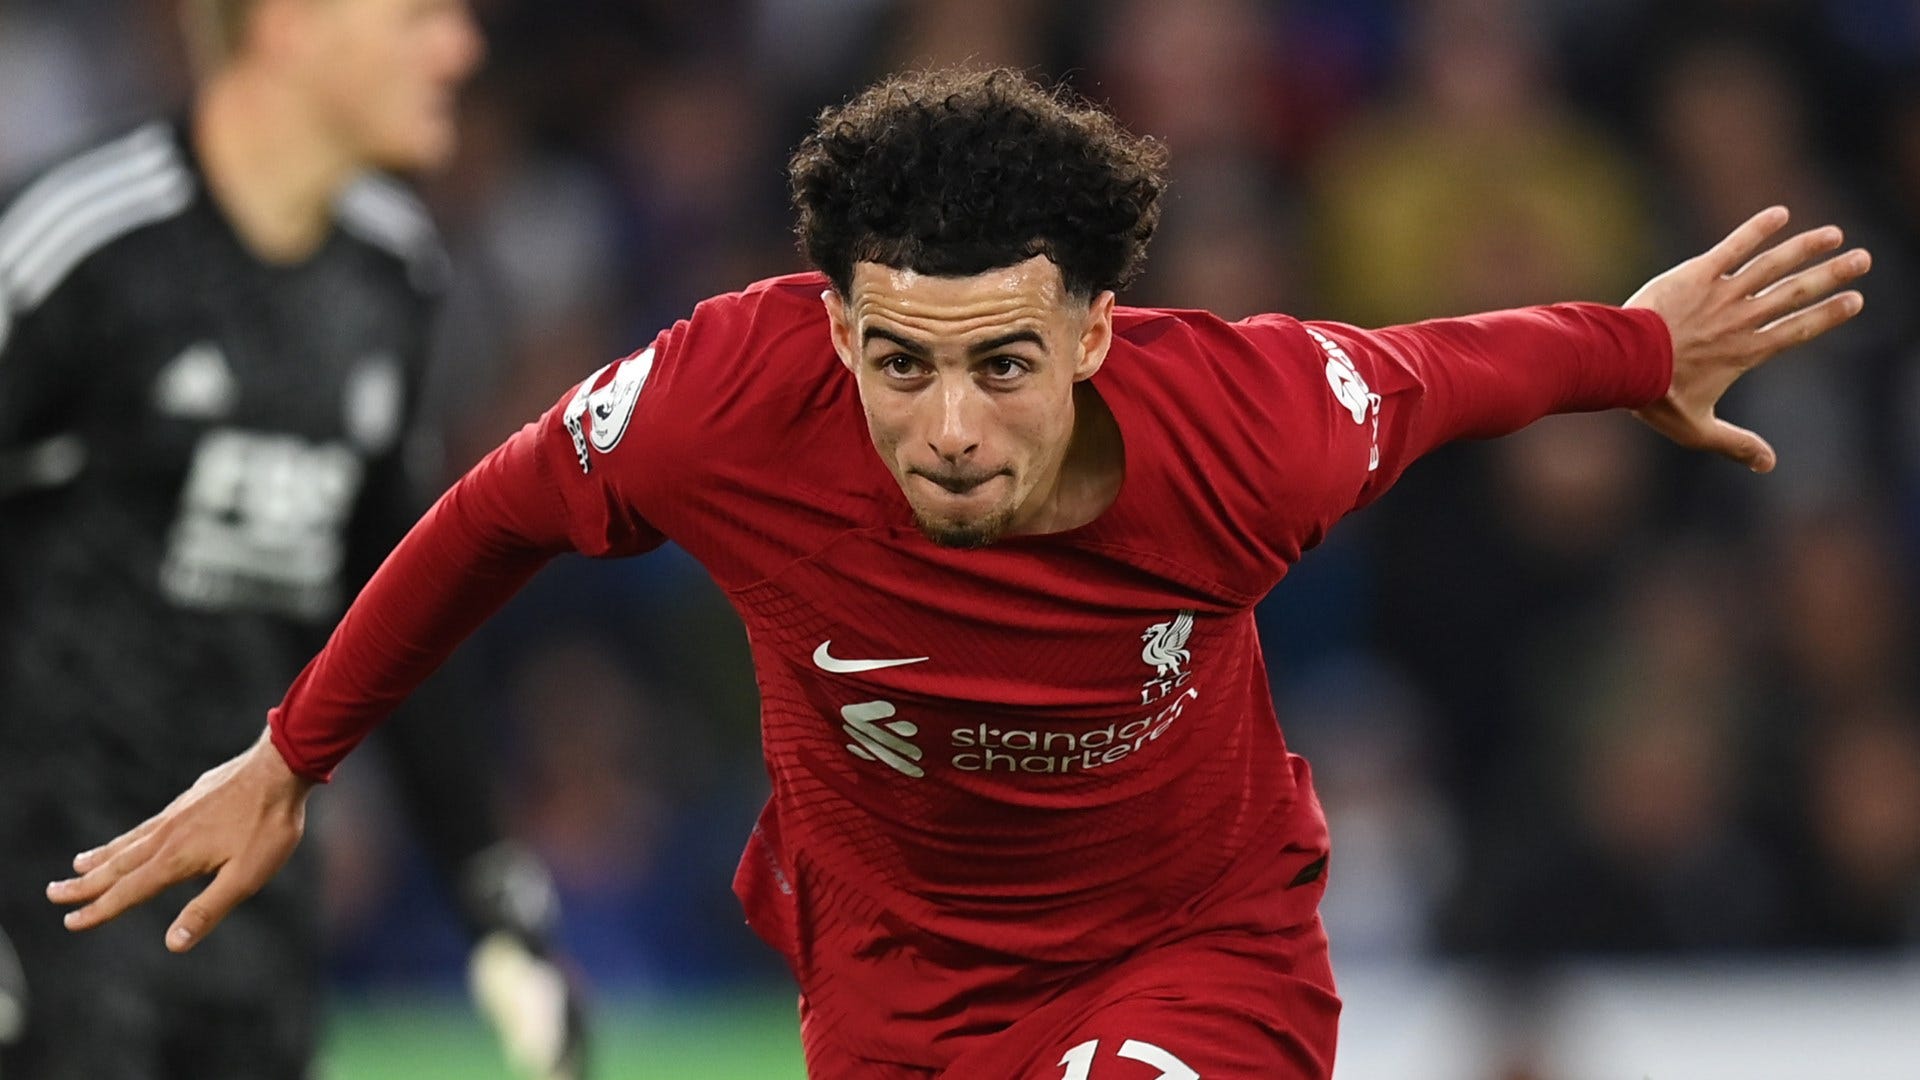  Liverpool players Curtis Jones, Trent Alexander-Arnold, Alisson and Diogo Jota are all ruled out for the game against Leicester City.